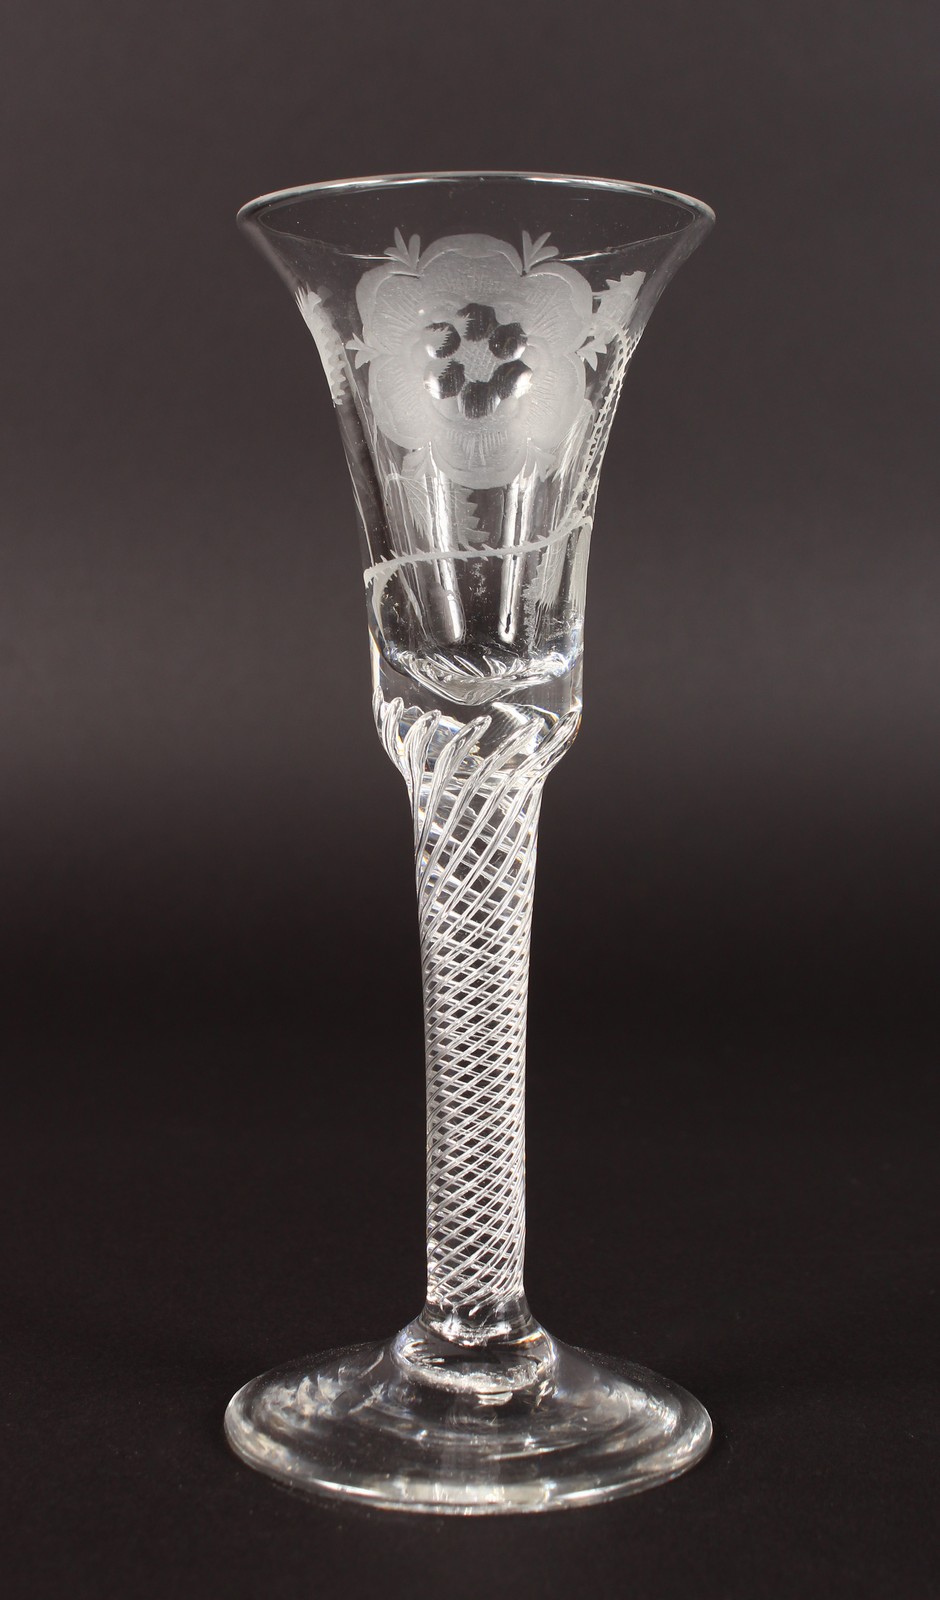 A JACOBITE WINE GLASS, the bowl engraved with six petal rose, with air twist stem. 6ins high.